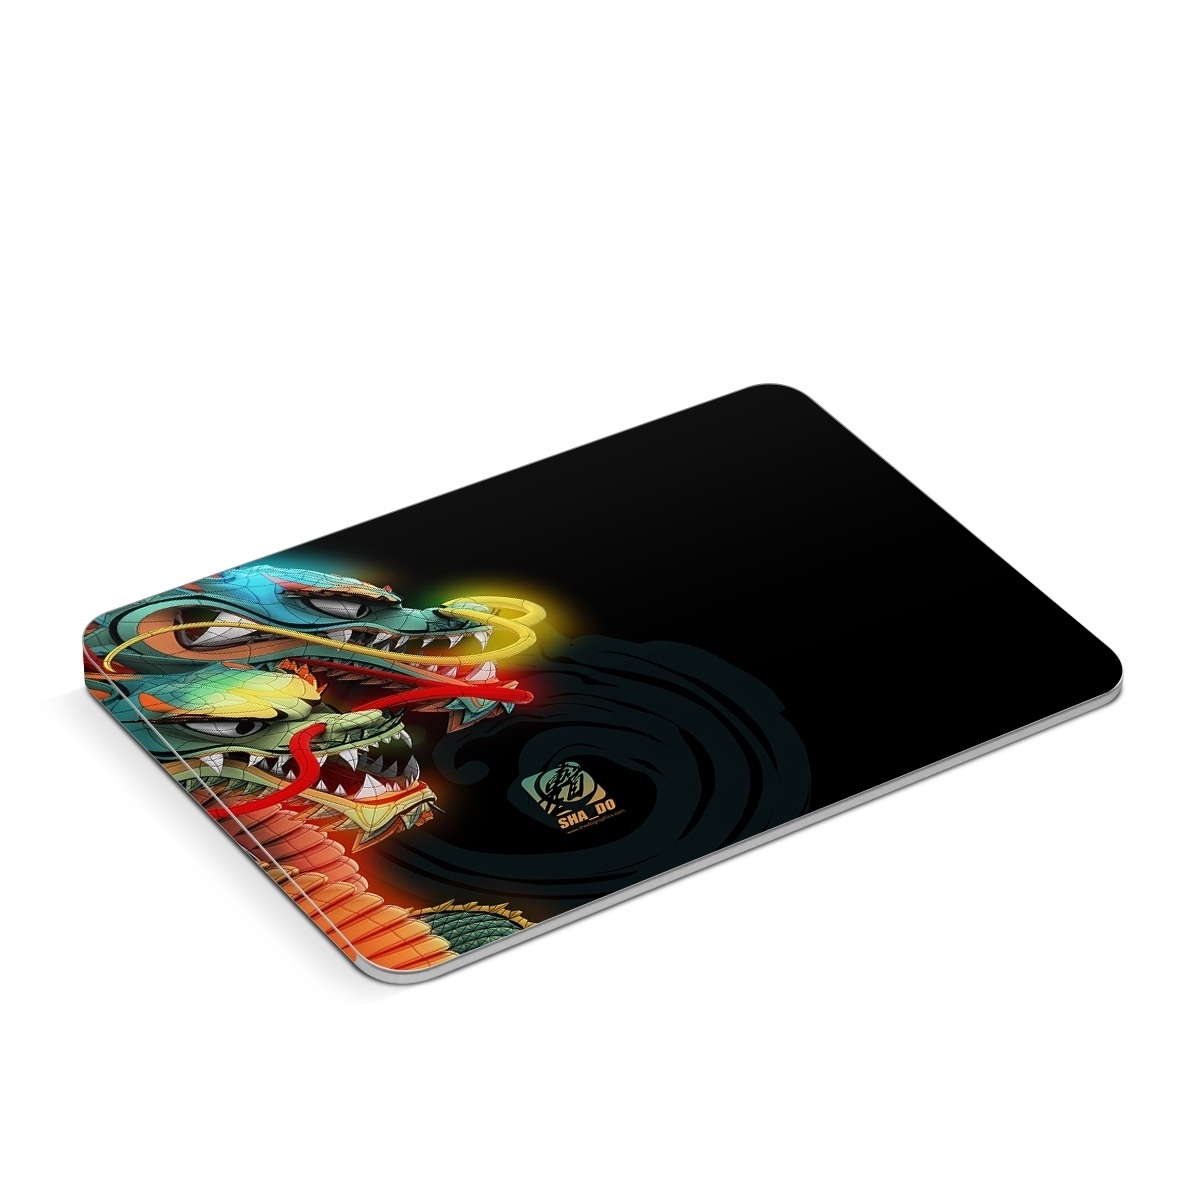 Apple Magic Trackpad Skin design of Dragon, Fictional character, Illustration, Art, Cg artwork, Fiction, Mythical creature, Graphics, with black, green, red, yellow, orange colors